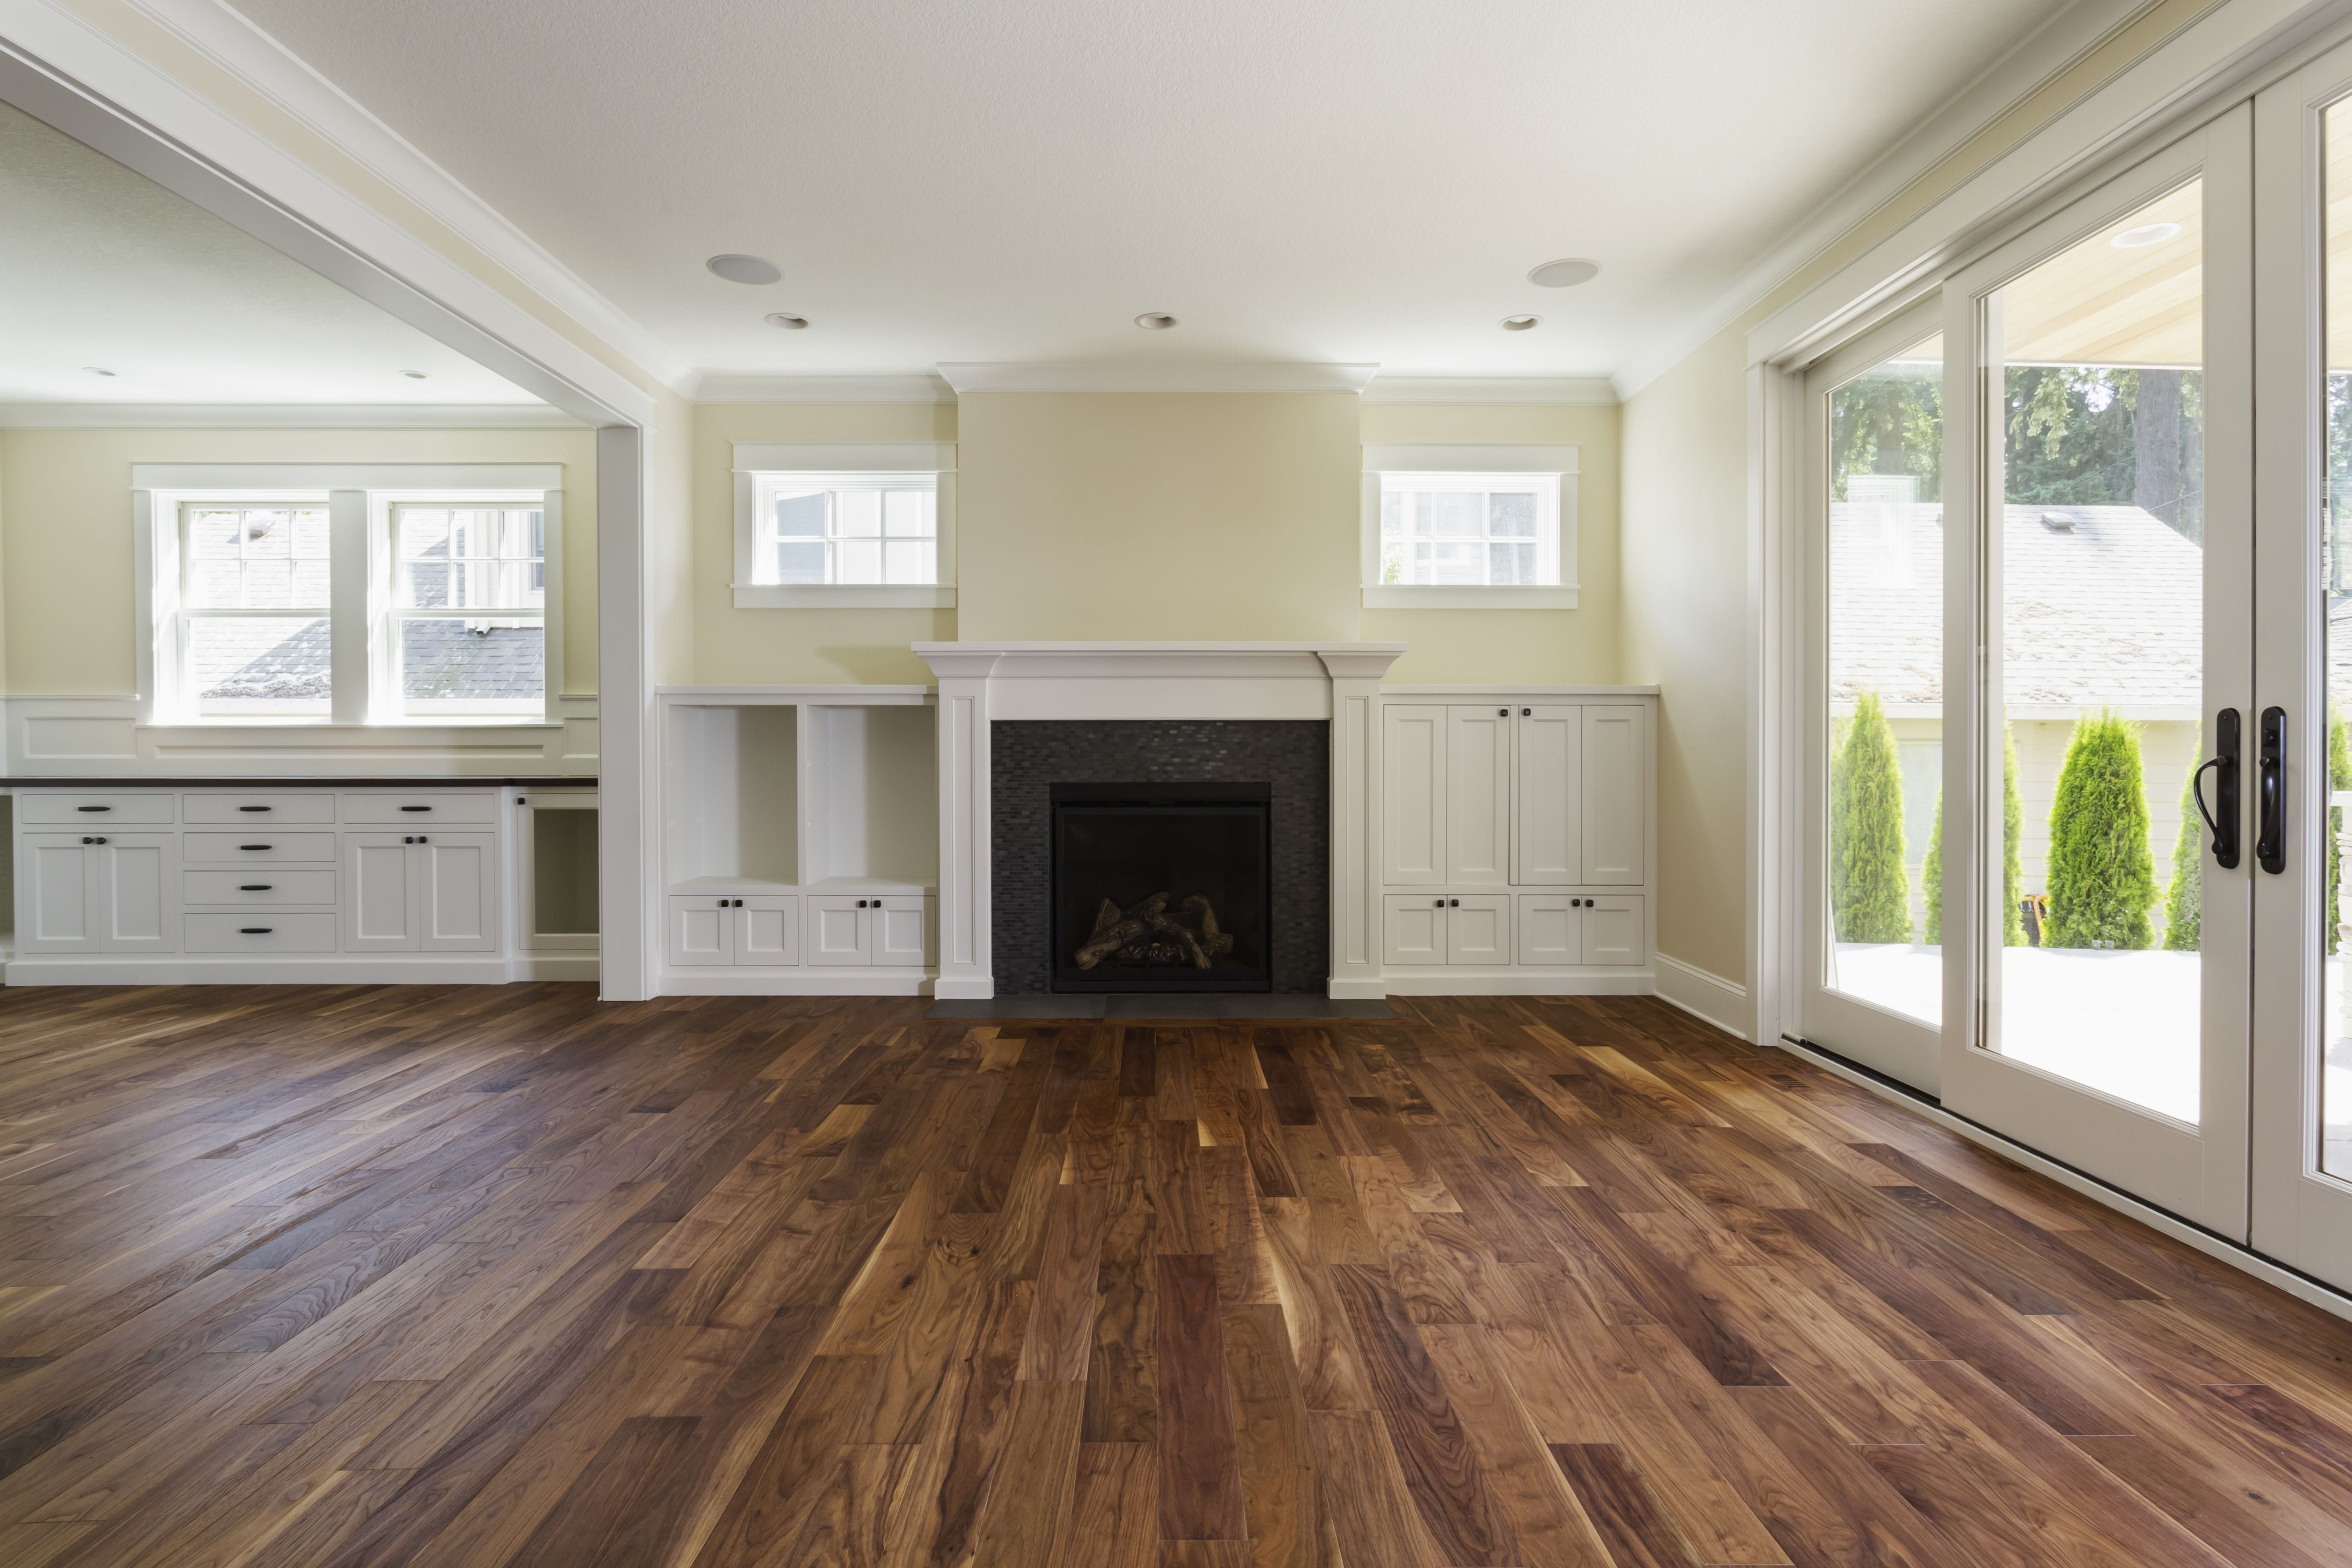 27 Fashionable Pictures Of White Oak Hardwood Floors 2024 free download pictures of white oak hardwood floors of the pros and cons of prefinished hardwood flooring throughout fireplace and built in shelves in living room 482143011 57bef8e33df78cc16e035397